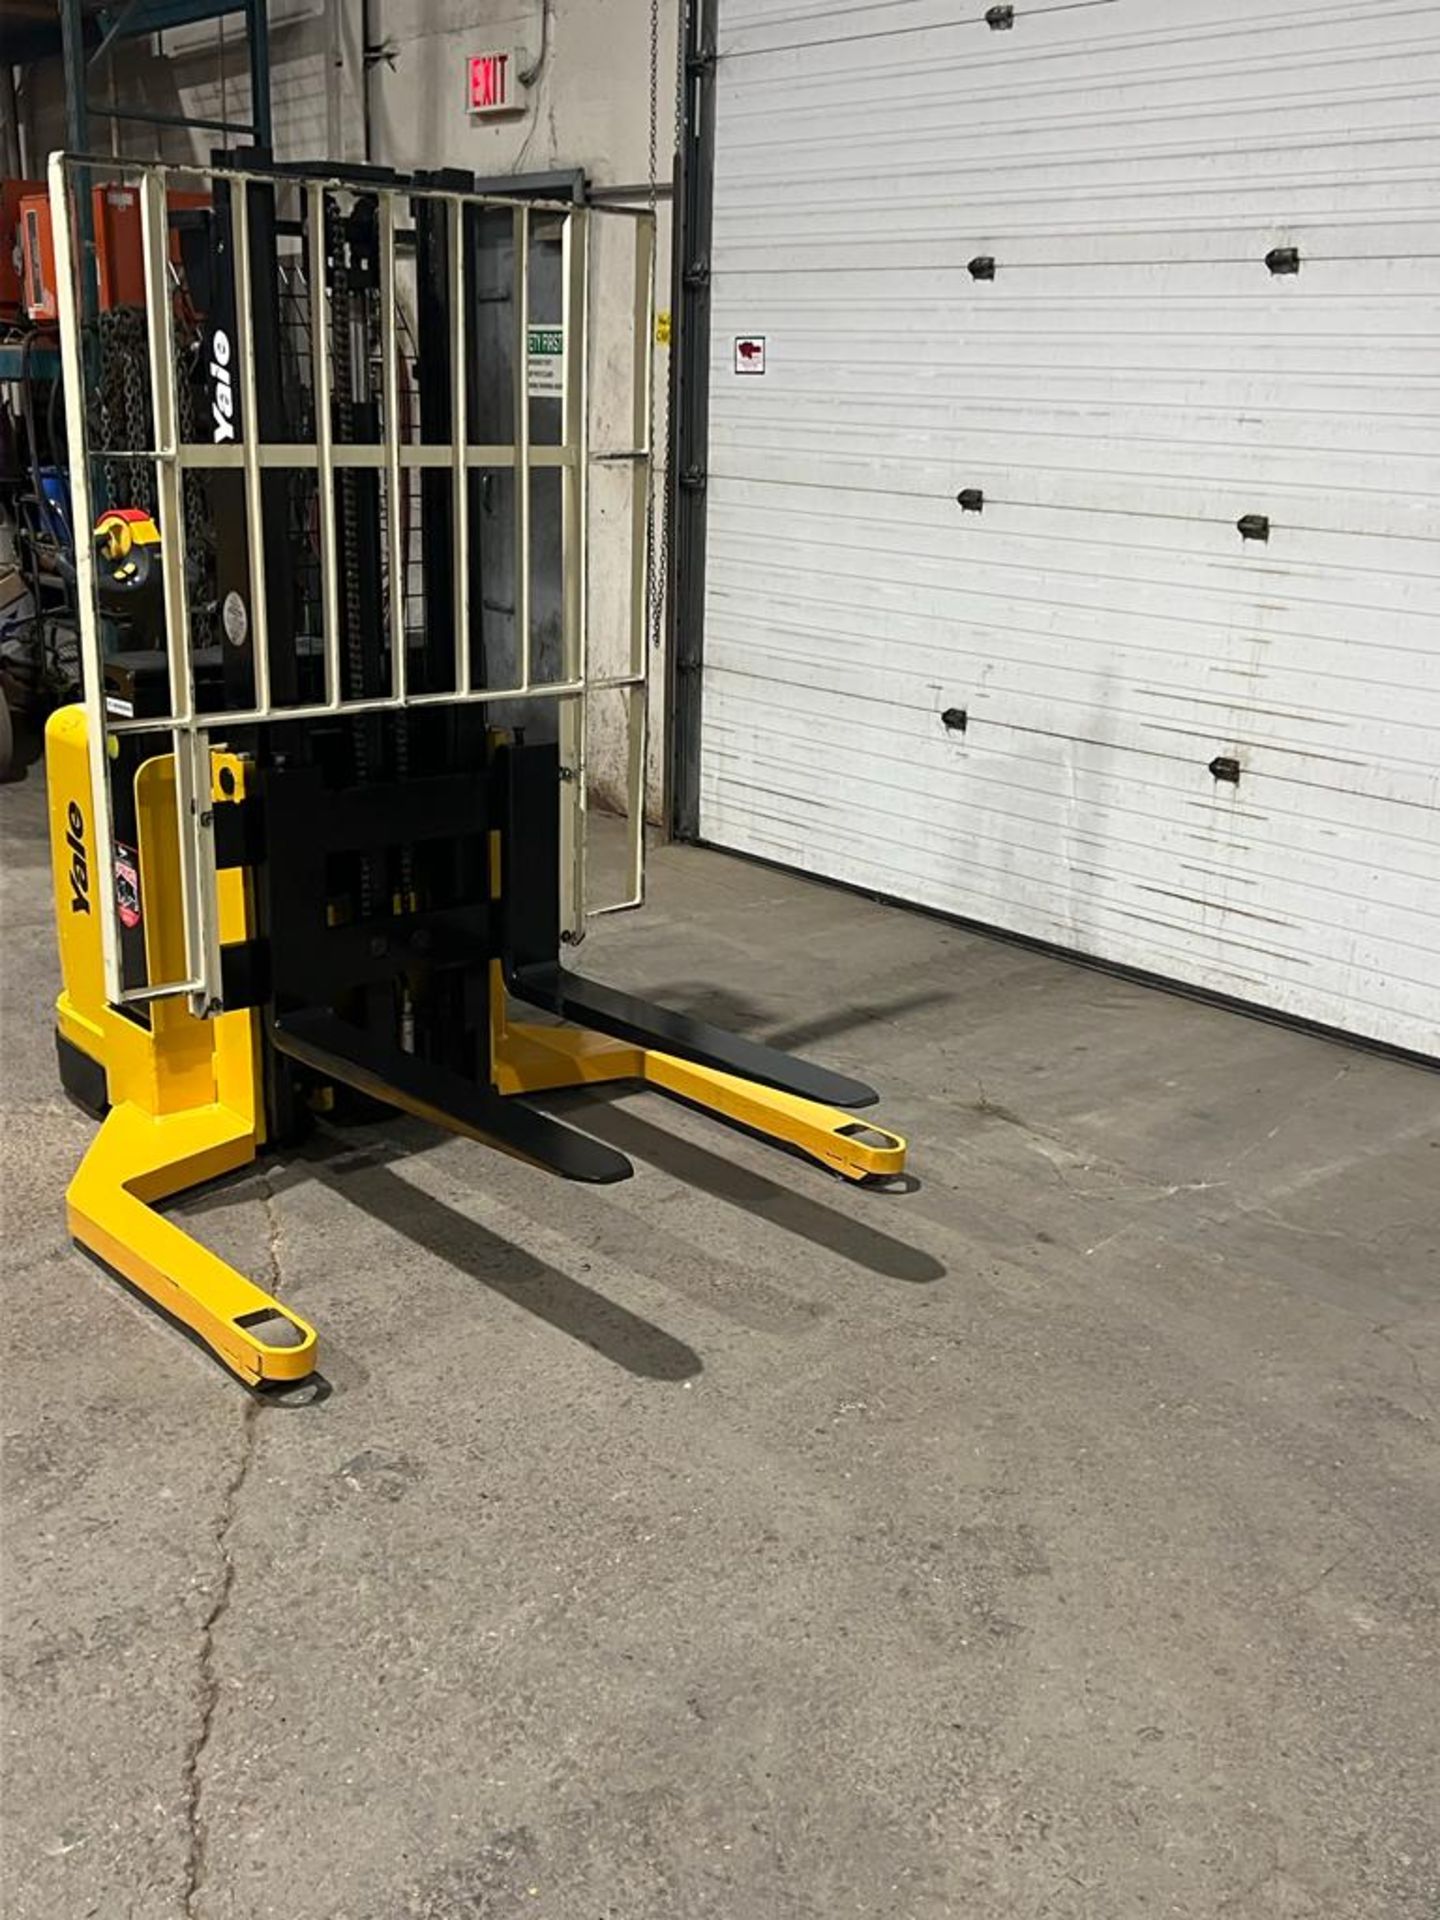 2011 Yale Pallet Stacker Walk Behind 4,000lbs capacity 3-Stage Mast electric Powered Pallet Cart 24V - Image 3 of 3